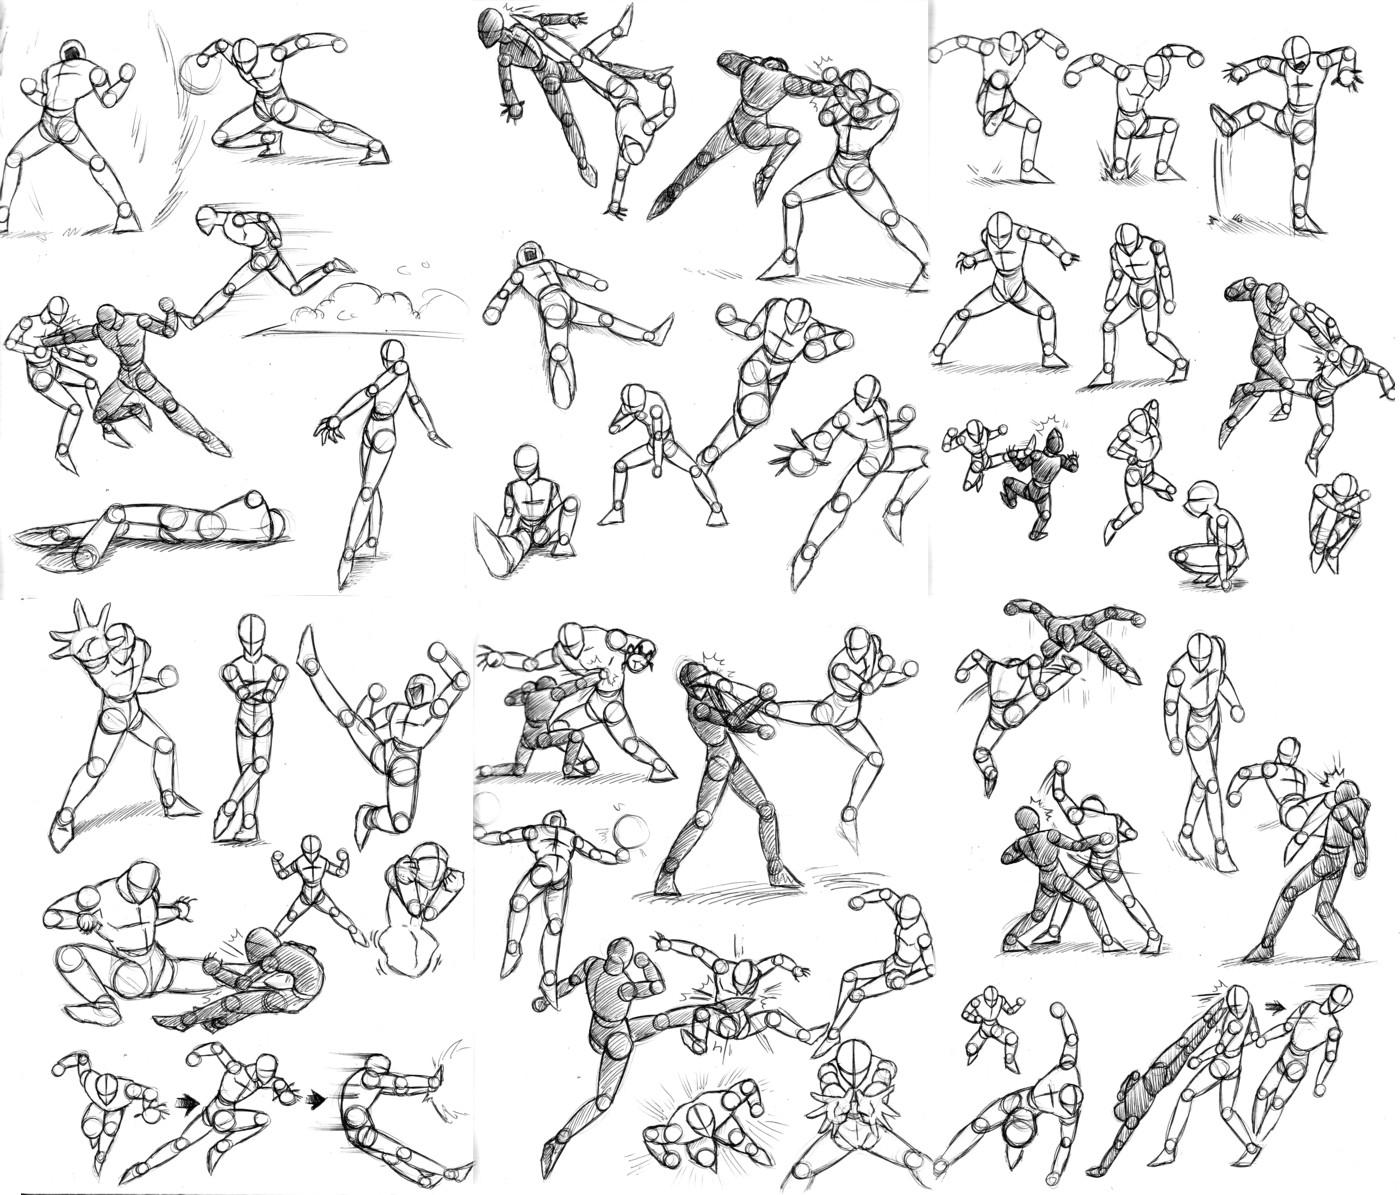 Lost art- Action poses by Dokuro on DeviantArt